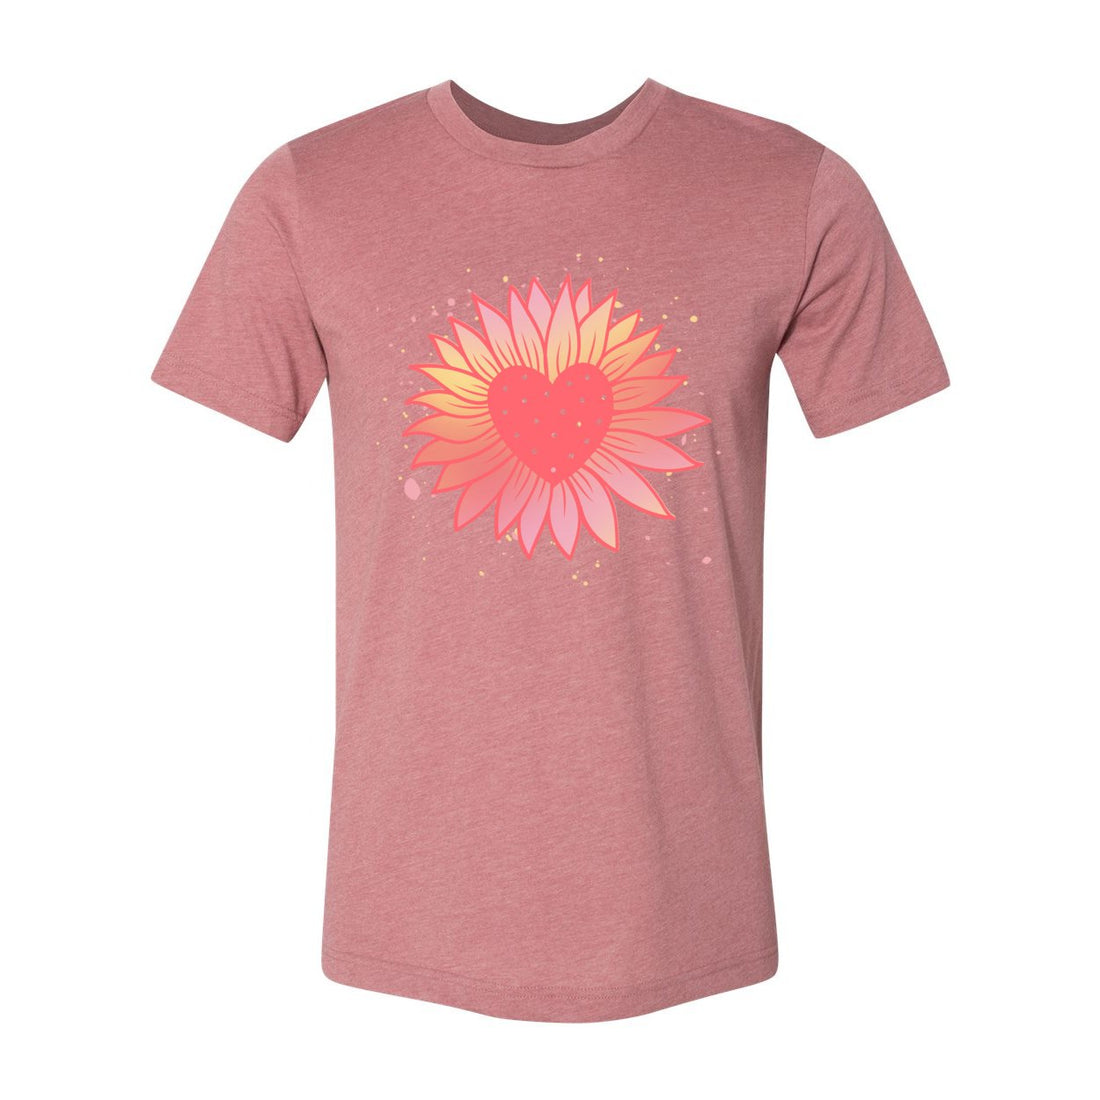 Sunny Sunflower Jersey Tee - T-Shirts - Positively Sassy - Sunny Sunflower Jersey Tee